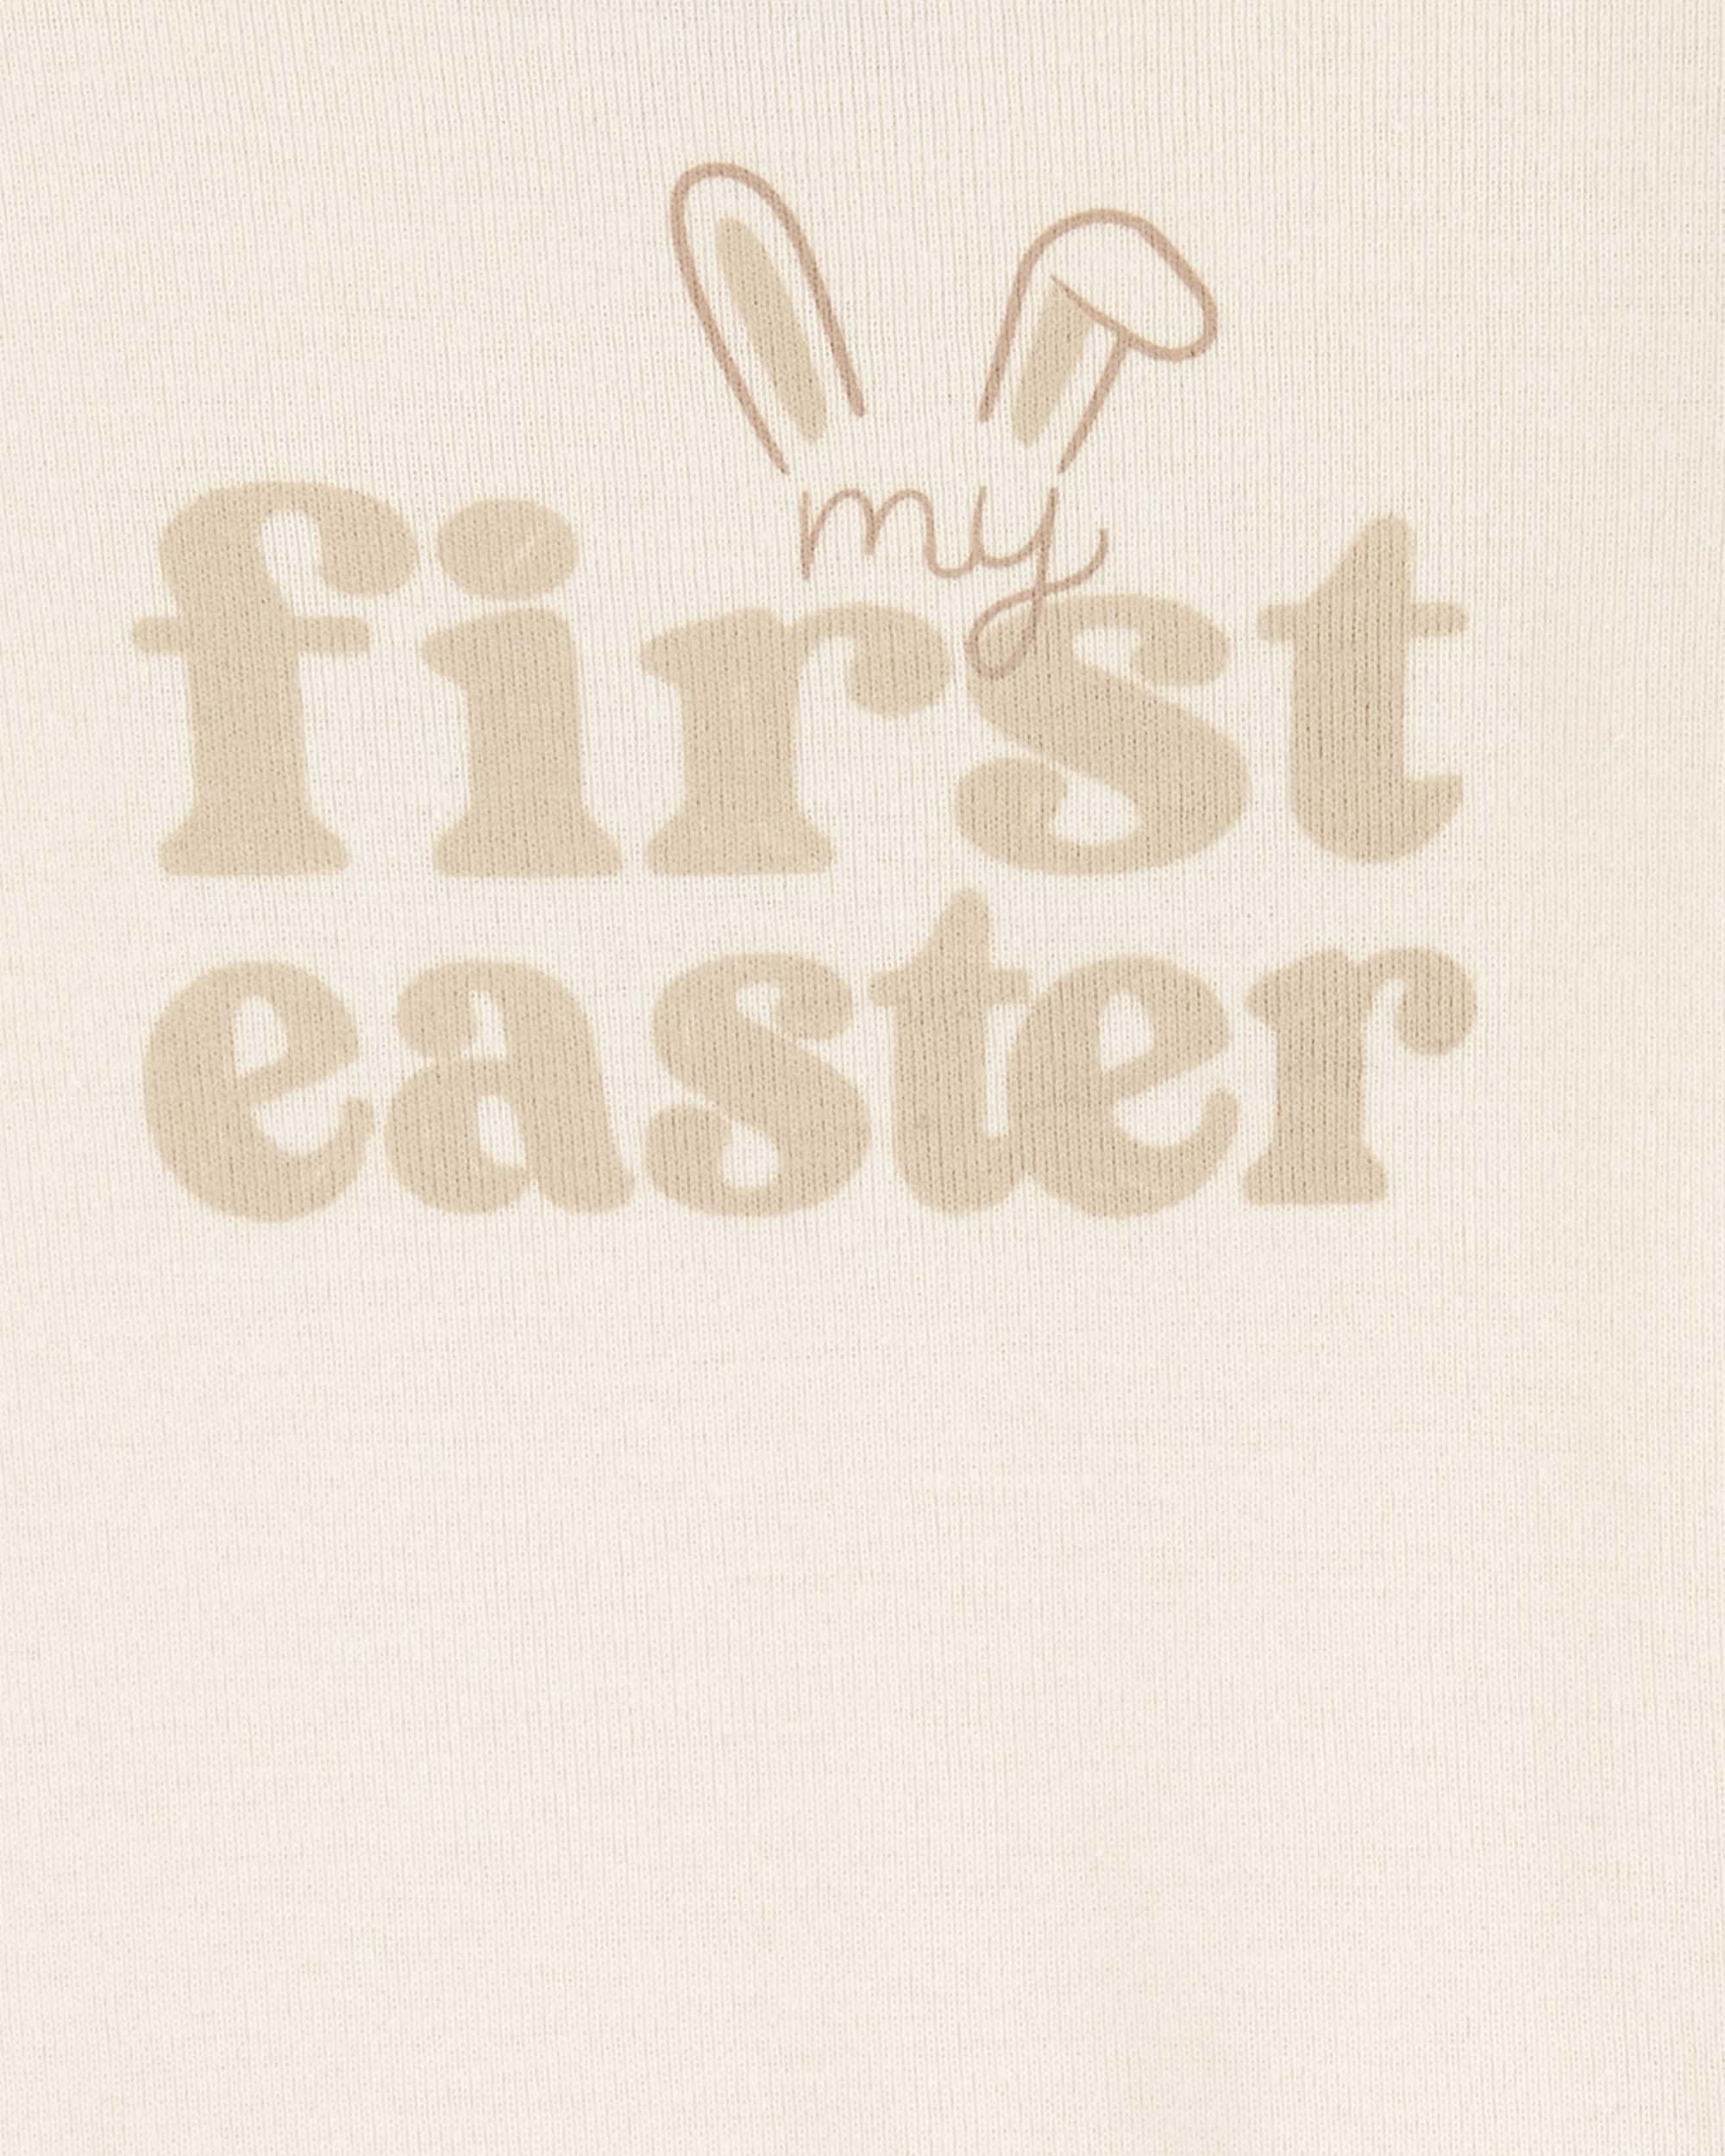 Baby First Easter Collectible Bodysuit